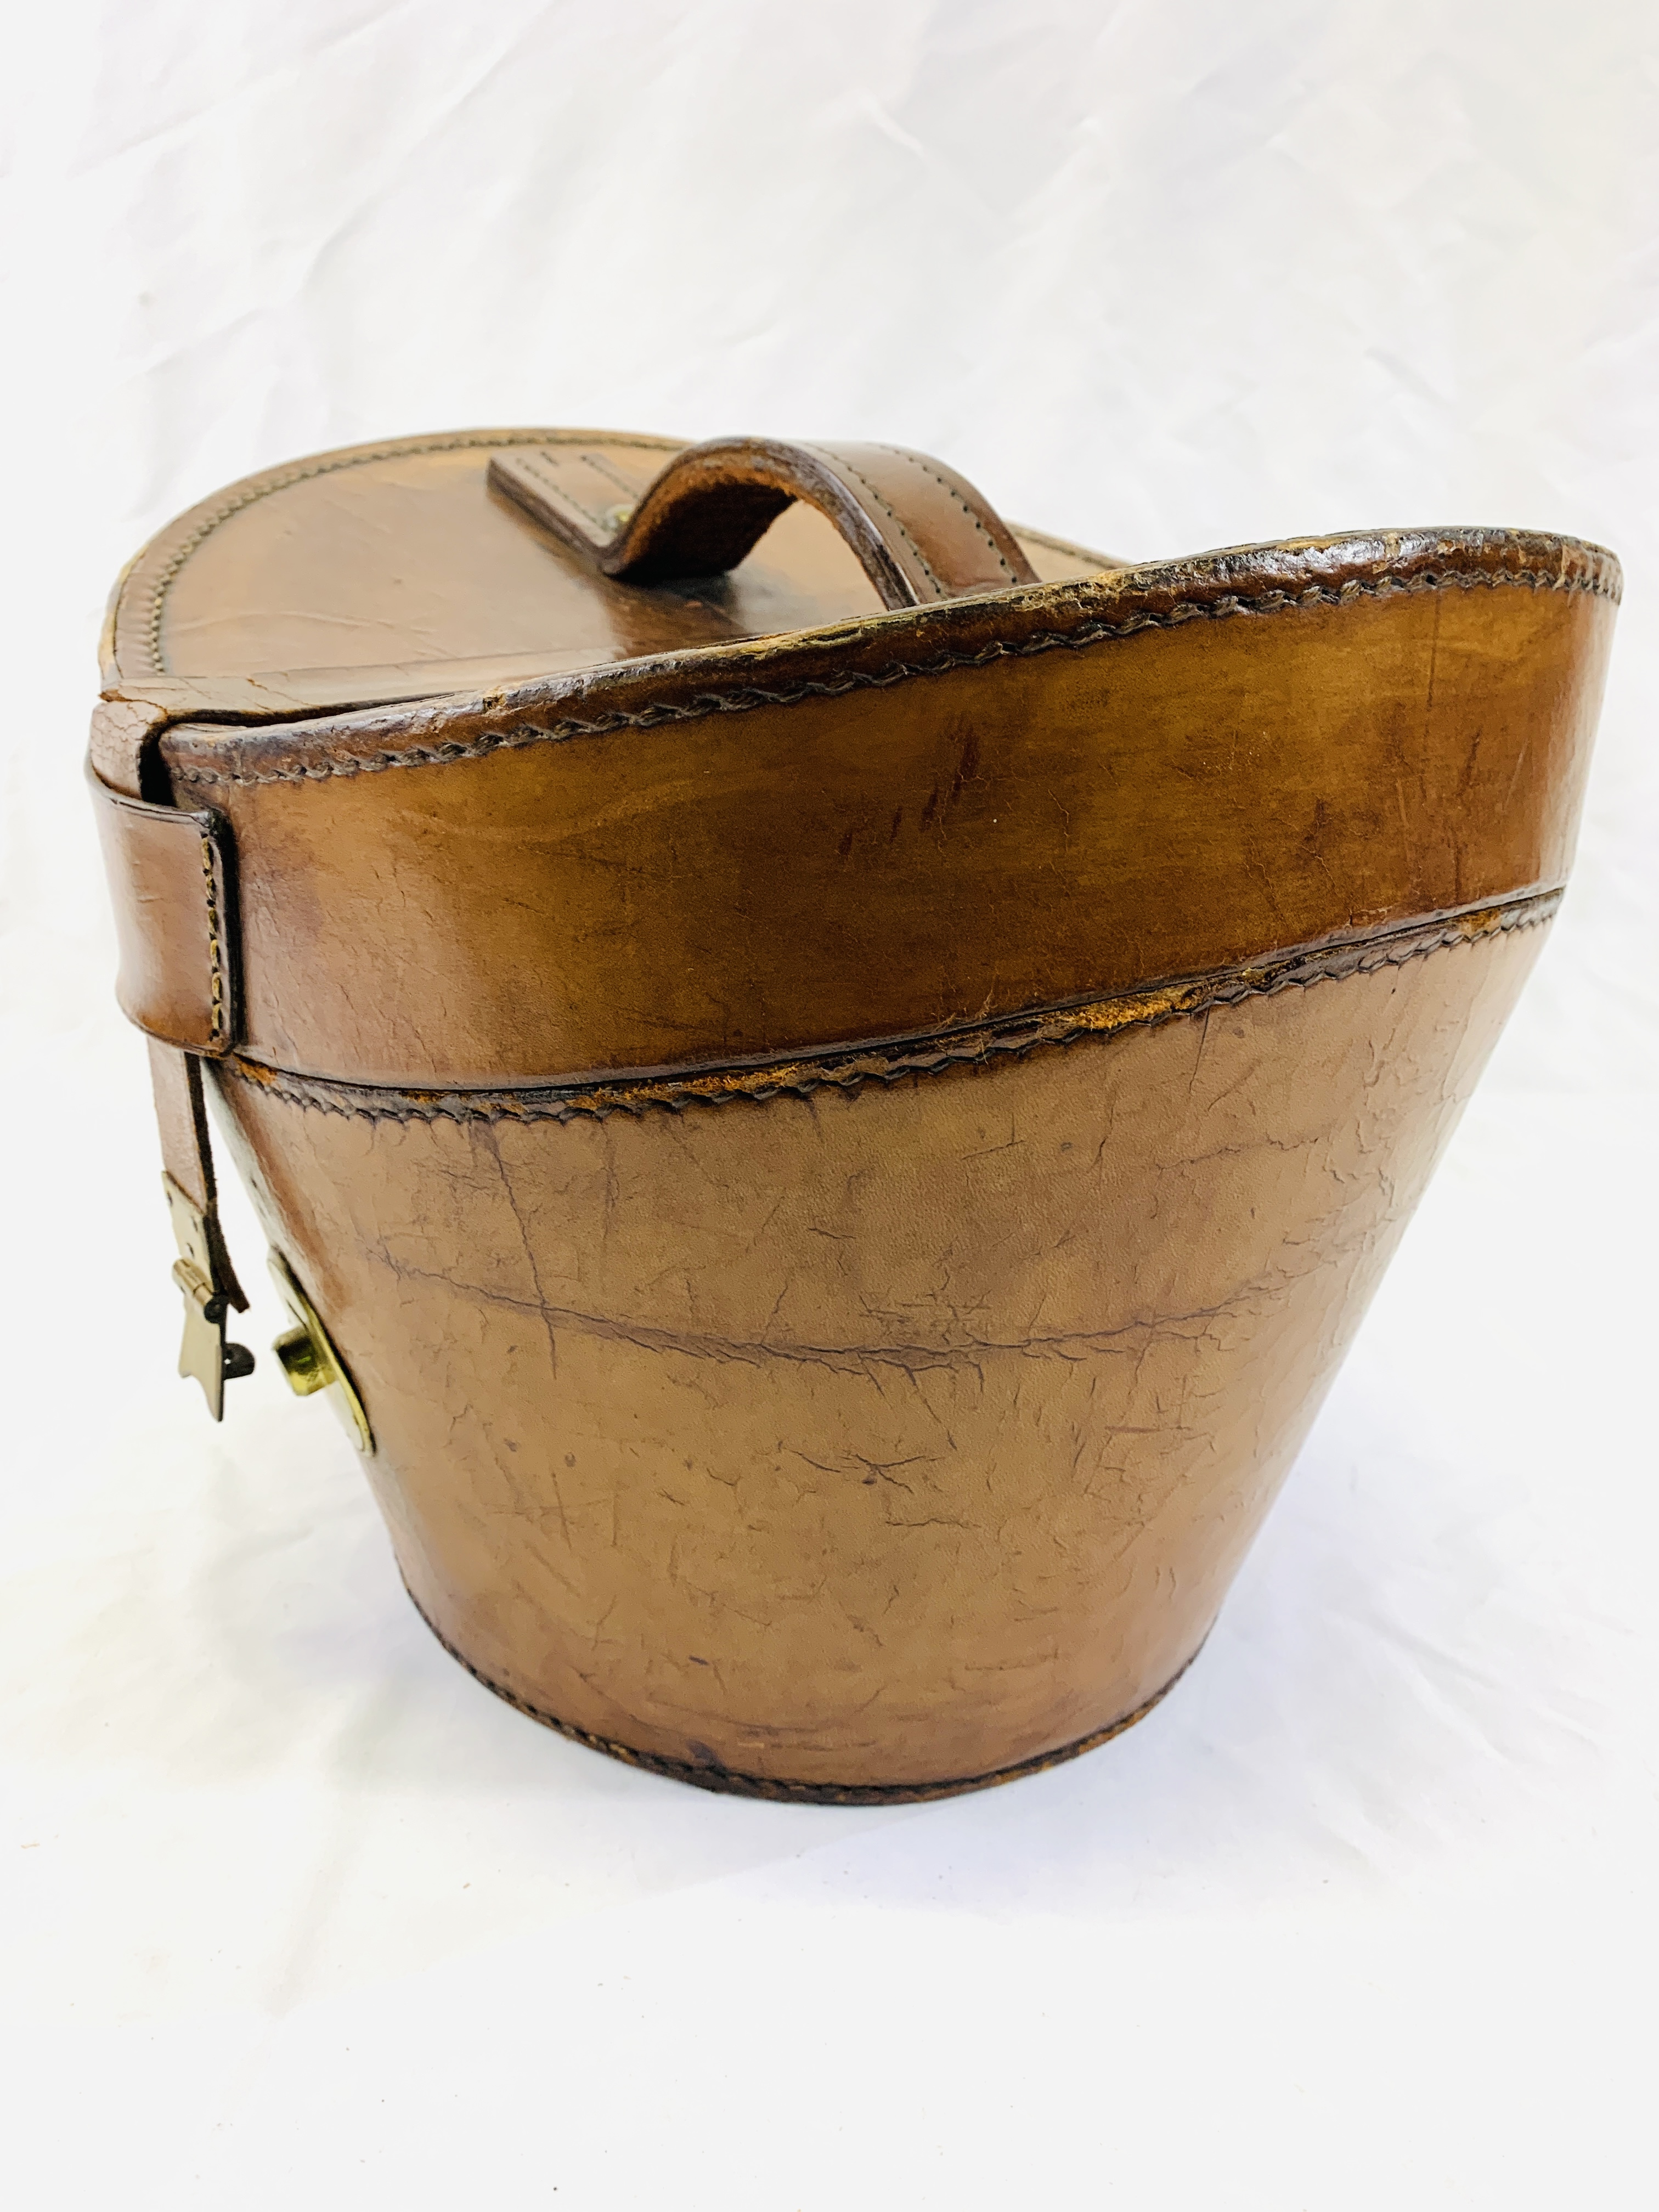 Brown leather hat box - Image 3 of 5